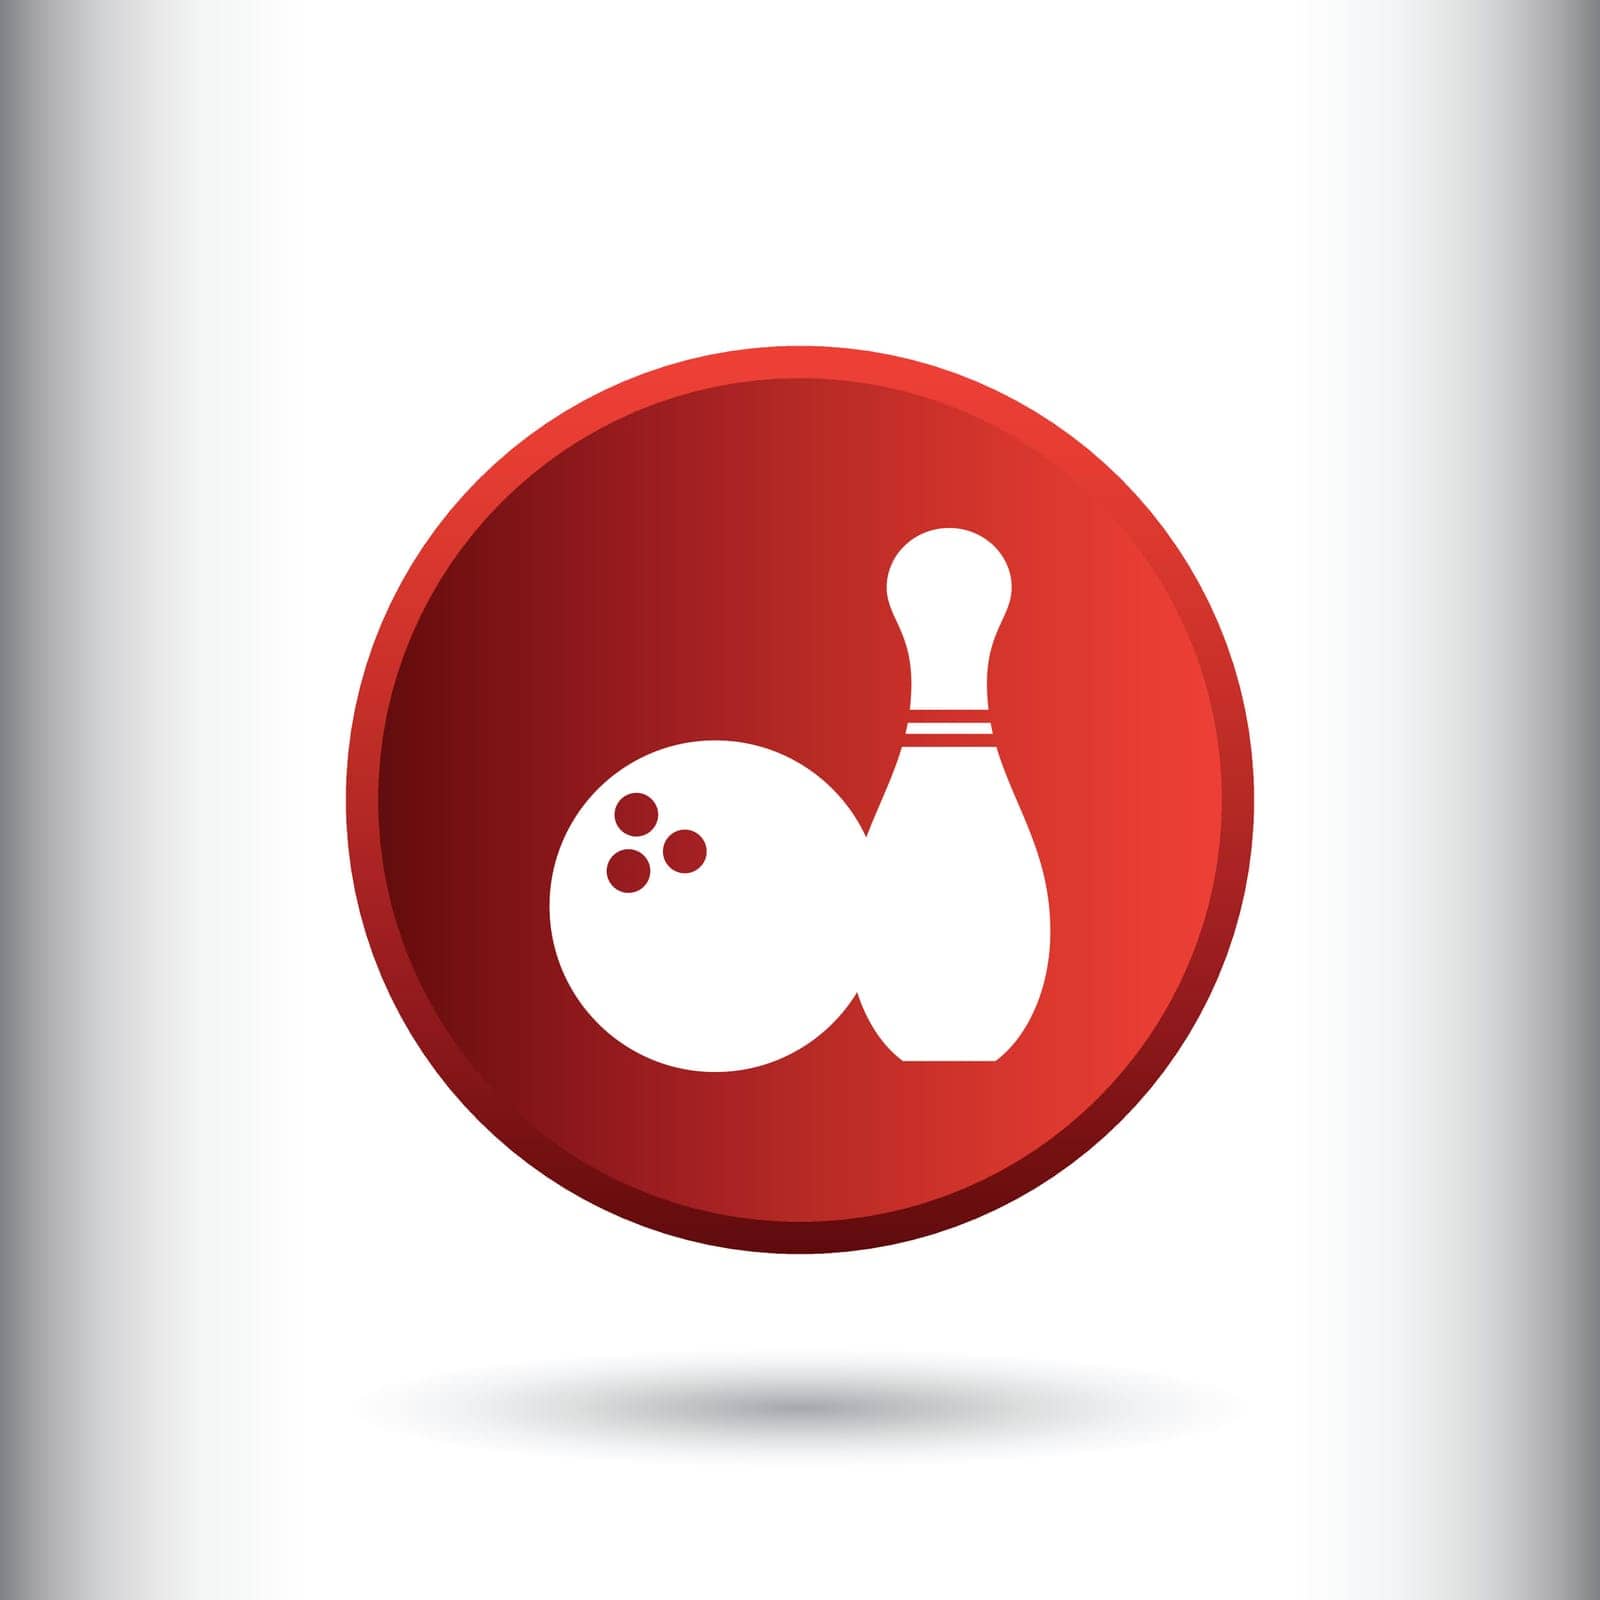 play,symbol,game,happy,concept,icon,sign,isolated,competition,bowl,bowling,speed,shot,ball,score,hit,pin,white,design,vector,win,graphic,element,shape,cartoon,recreation,impact,strike,black,retro,equipment,icons,creative,target,background,silhouette,illustration,sport,fun,object,hobby by ogqcorp